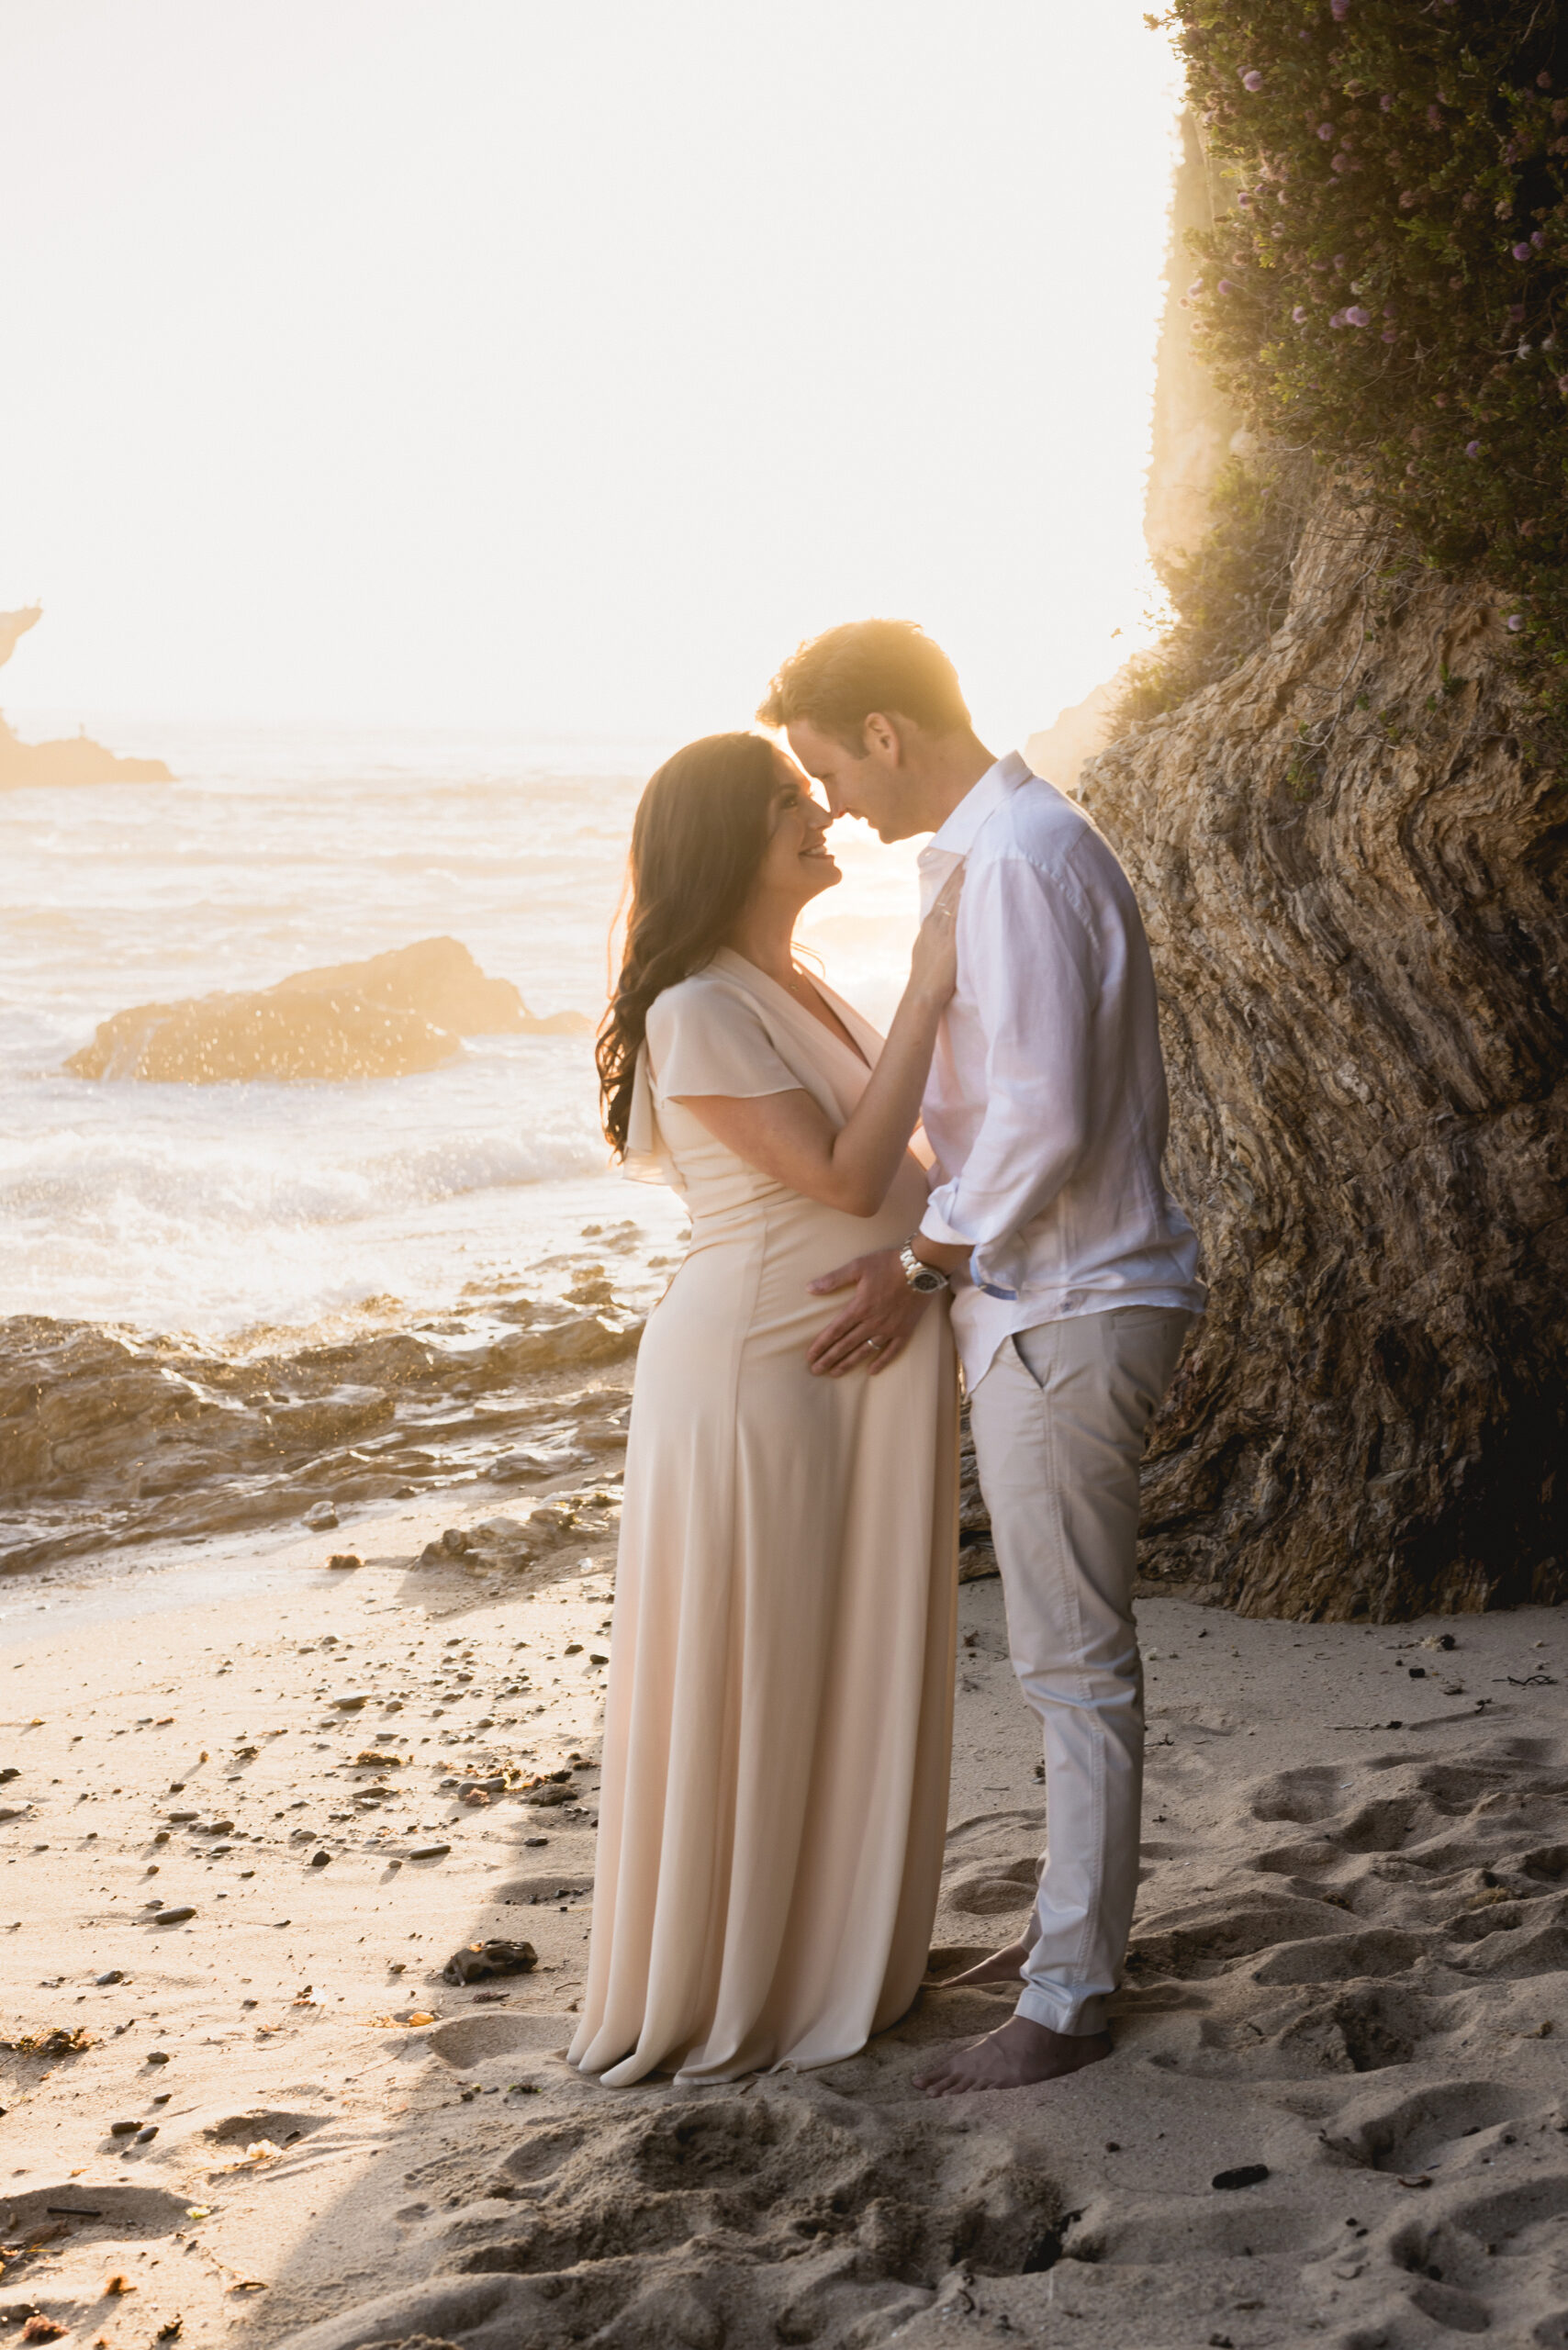 Mom and dad to be on a beach in Corona Del Mar | Image by Halleigh Hill